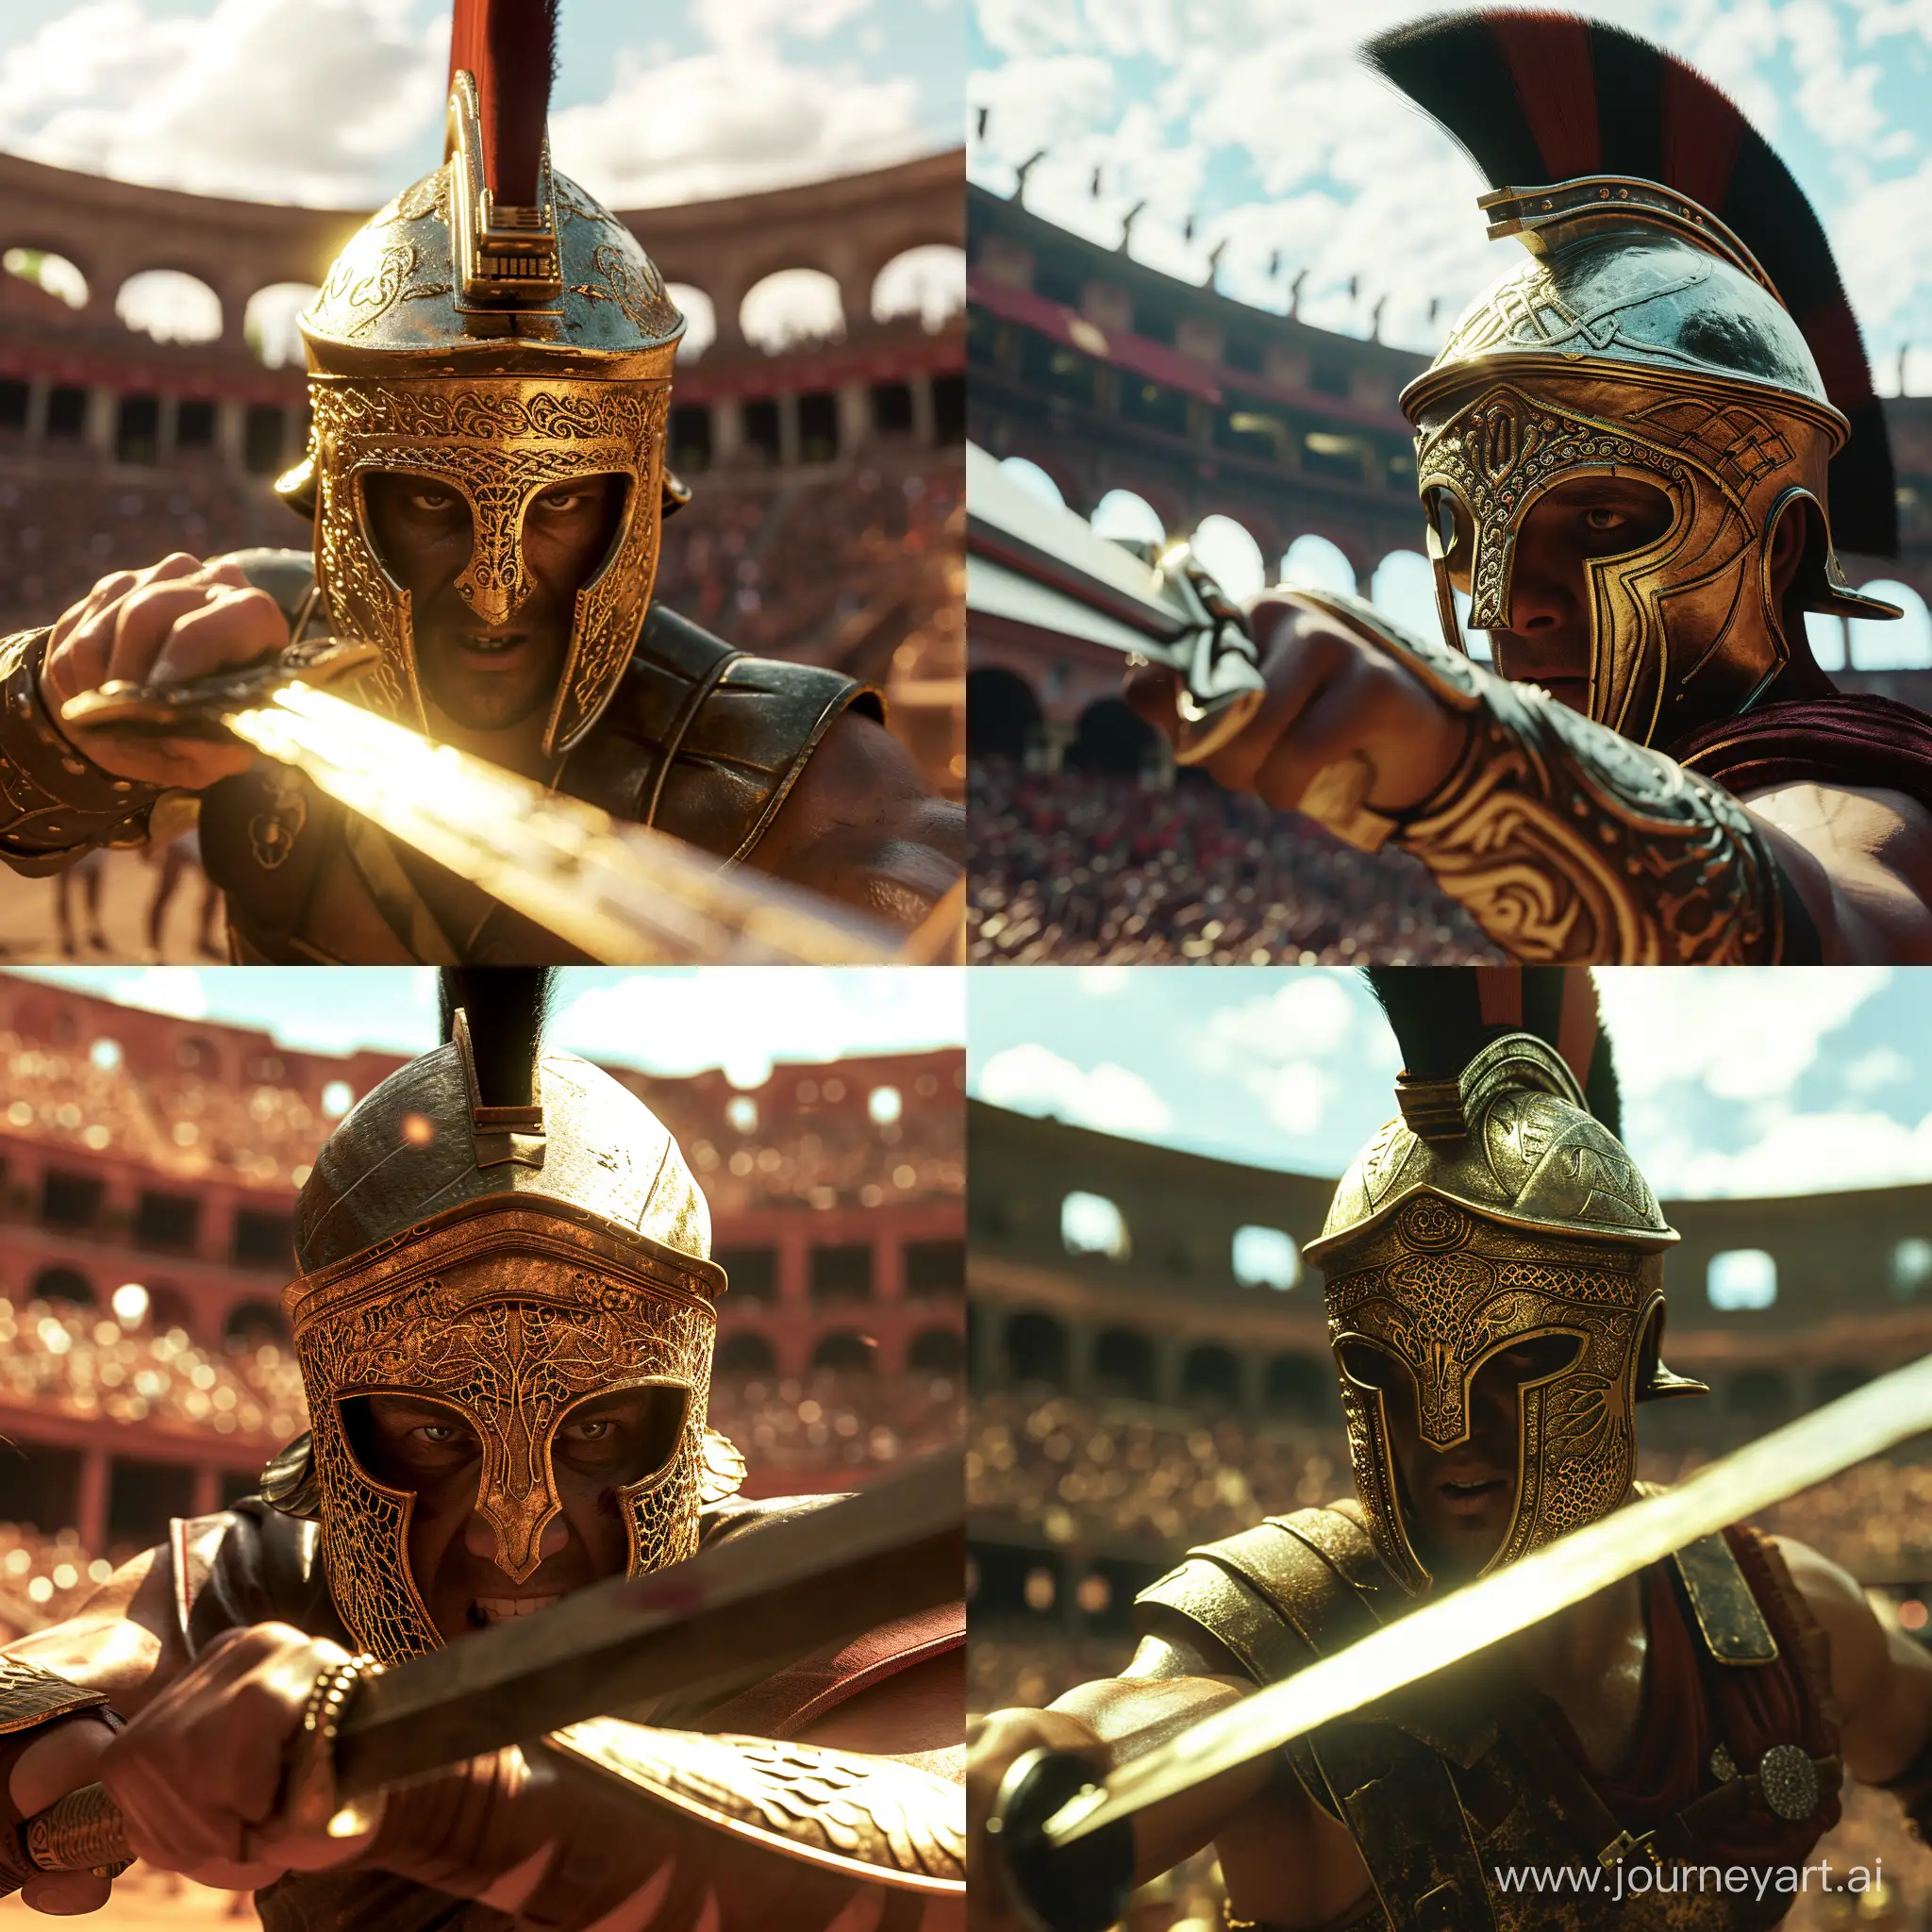 a close up high realistic cinematic photo of a gladiator with a sword going into battle inside a coliseum. His helmet is golden filigree, covering his cheeks and nose like the classic spartan helmet. --style raw